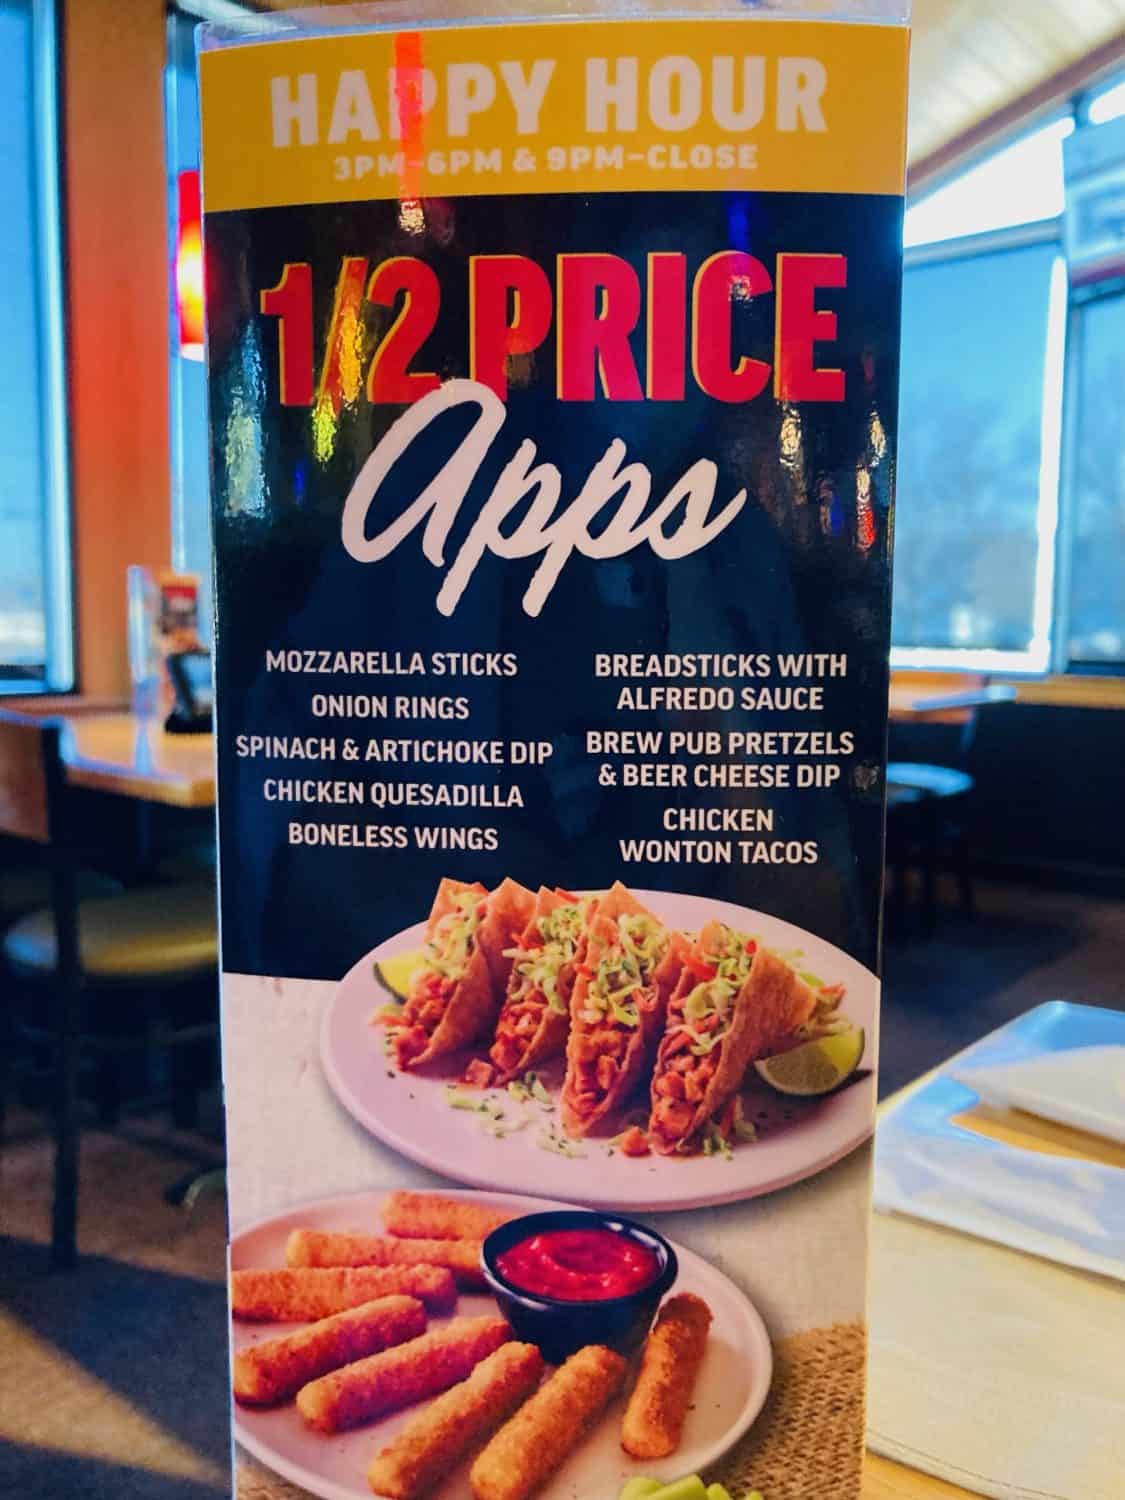 Applebee's Offers HalfPrice Appetizers Twice Every Day Mile High on